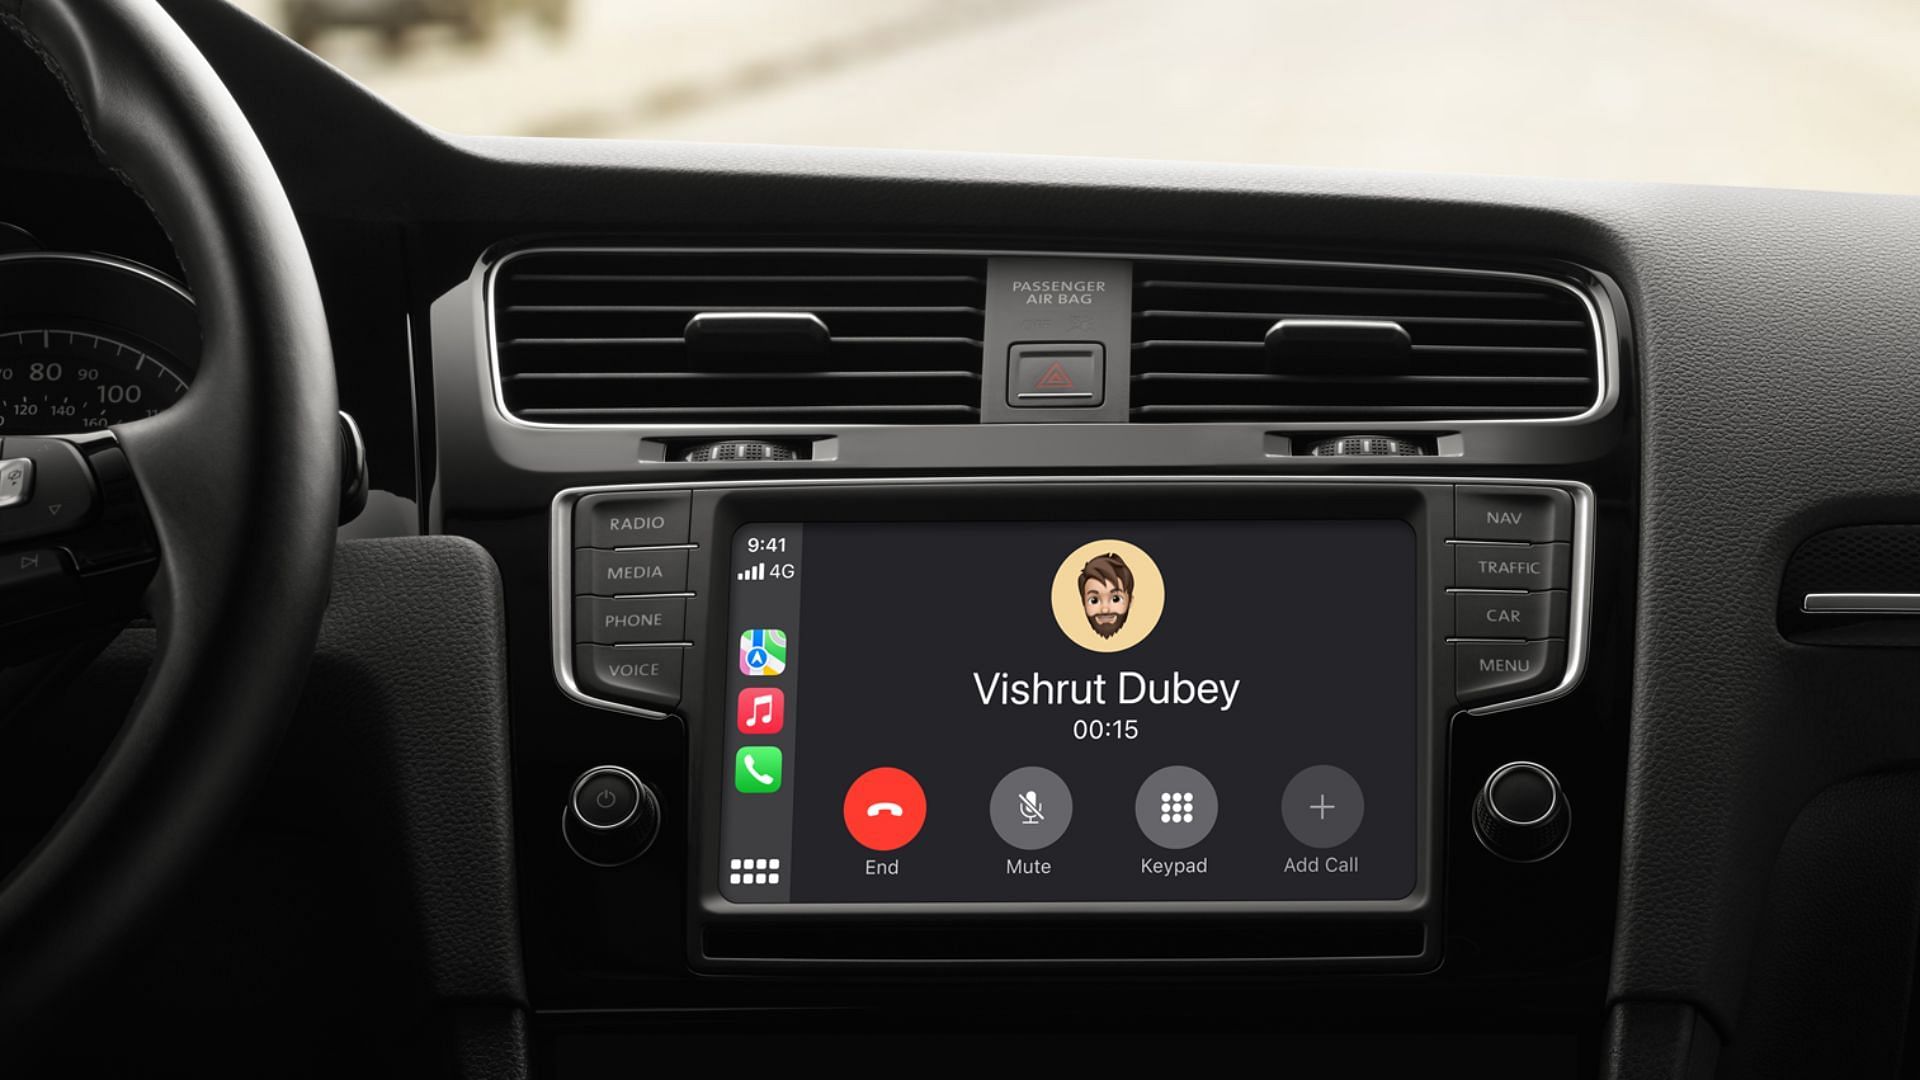 Android Auto Vs Apple CarPlay - Which One Best For Your Car? -  ElectronicsHub